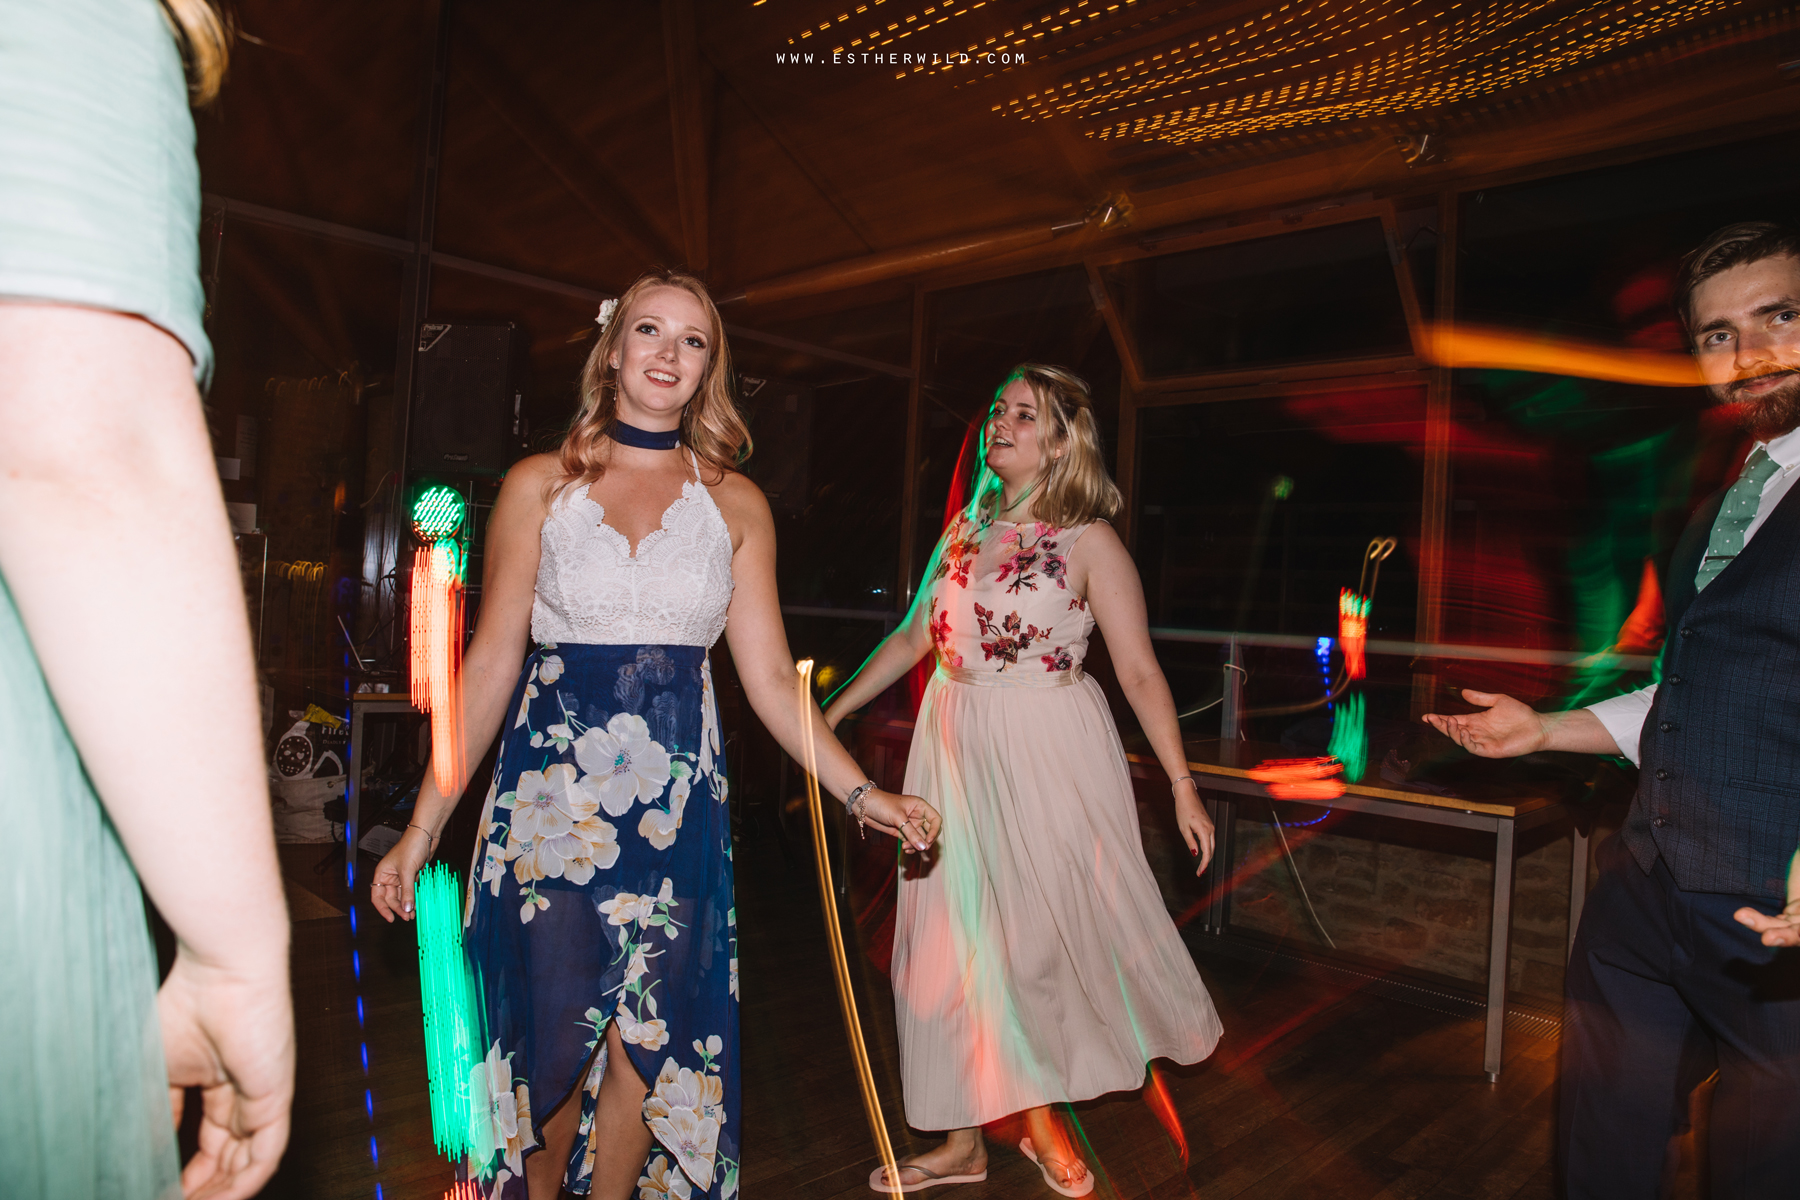 Norwich_Castle_Arcade_Grosvenor_Chip_Birdcage_Cathedral_Cloisters_Refectory_Wedding_Photography_Esther_Wild_Photographer_Norfolk_Kings_Lynn_3R8A3357.jpg